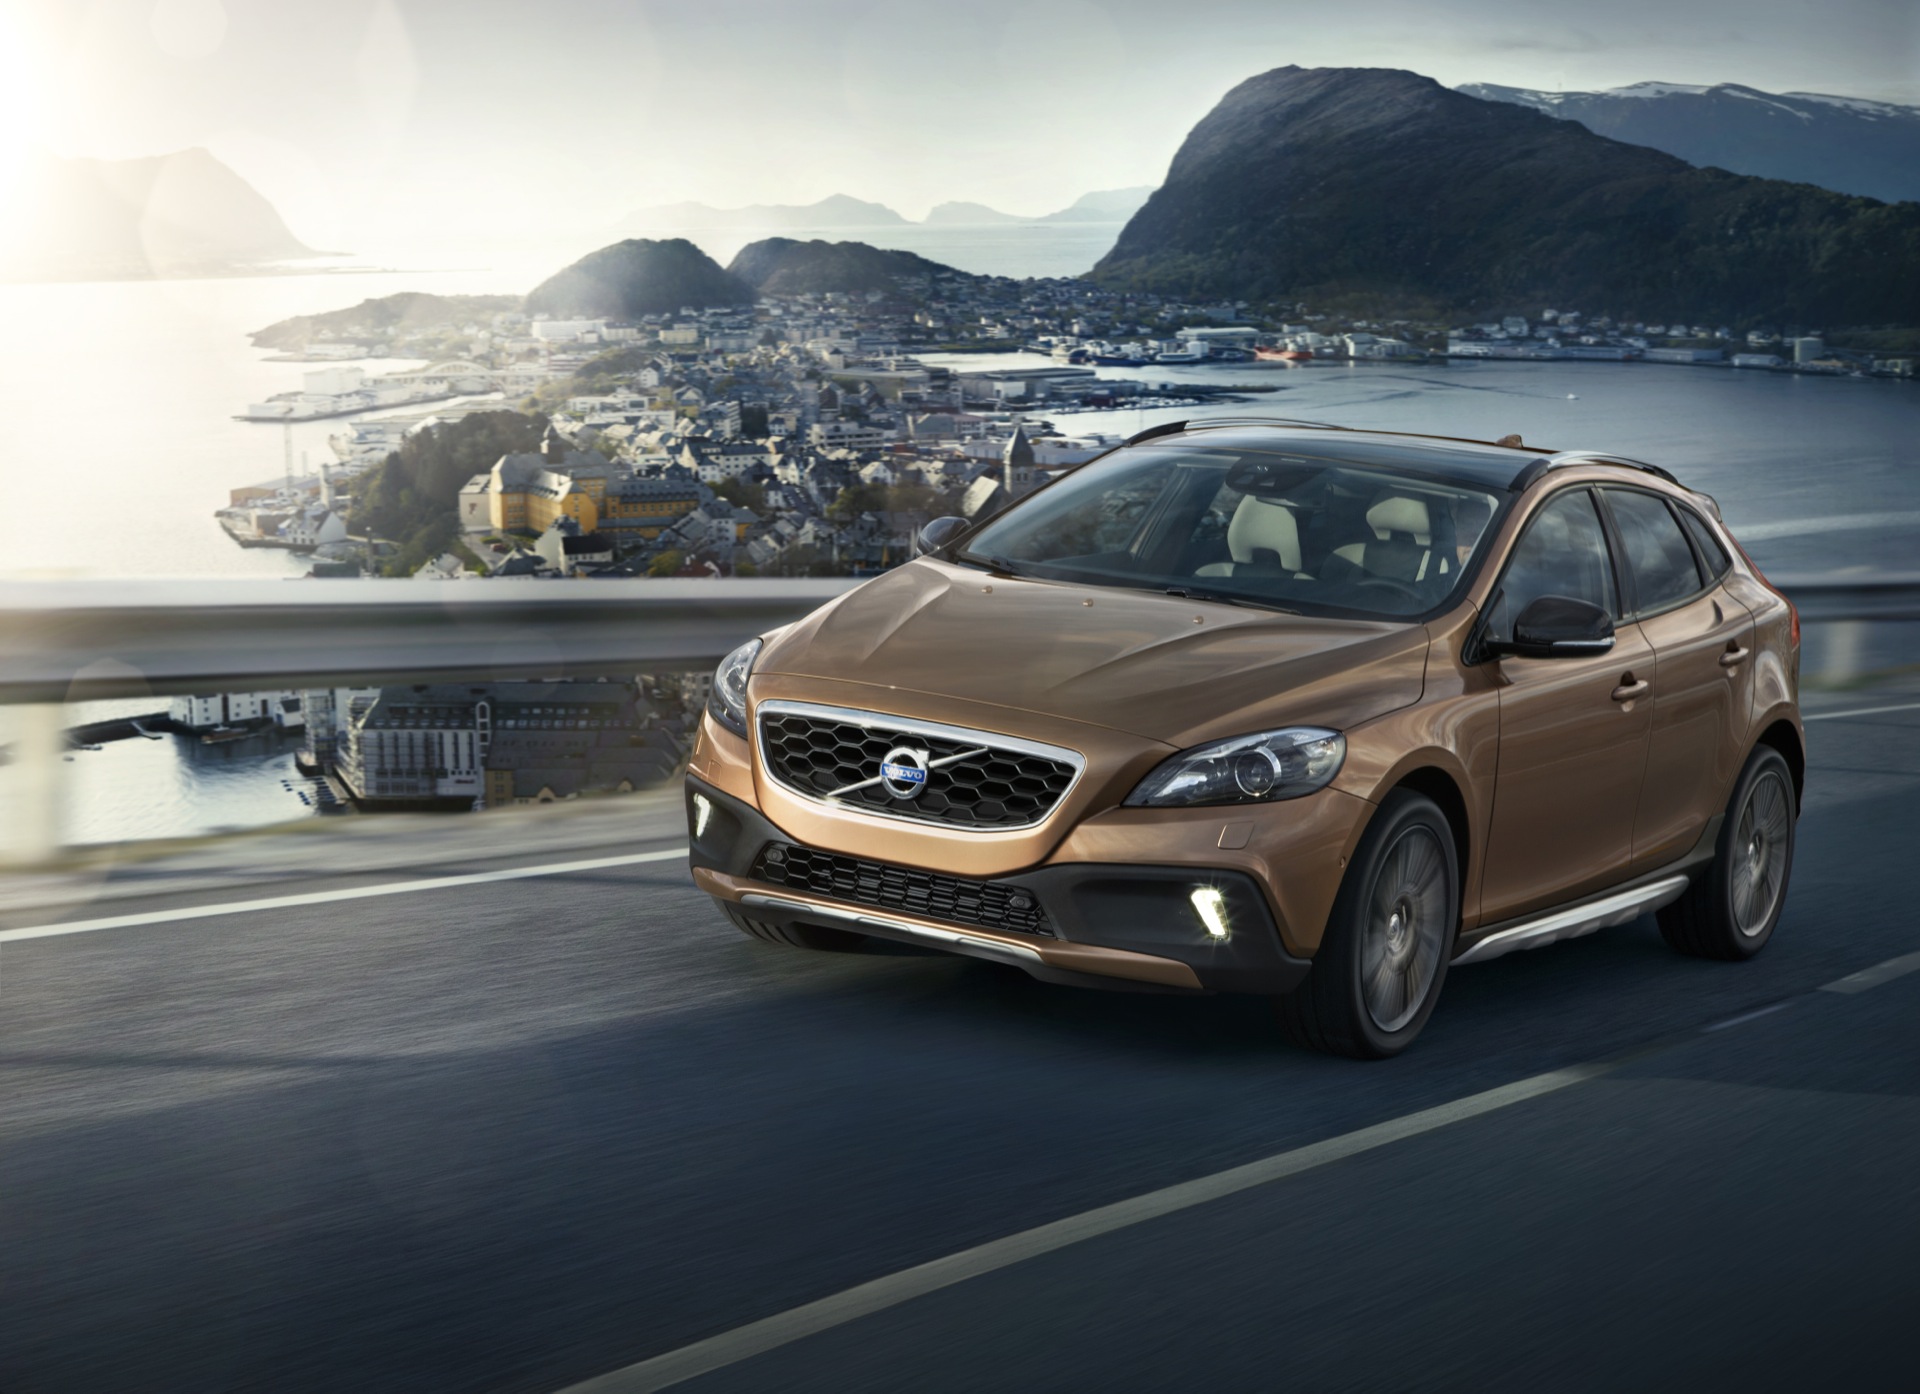 VOLVO V40 CROSS COUNTRY @drivelife.it magazine on line